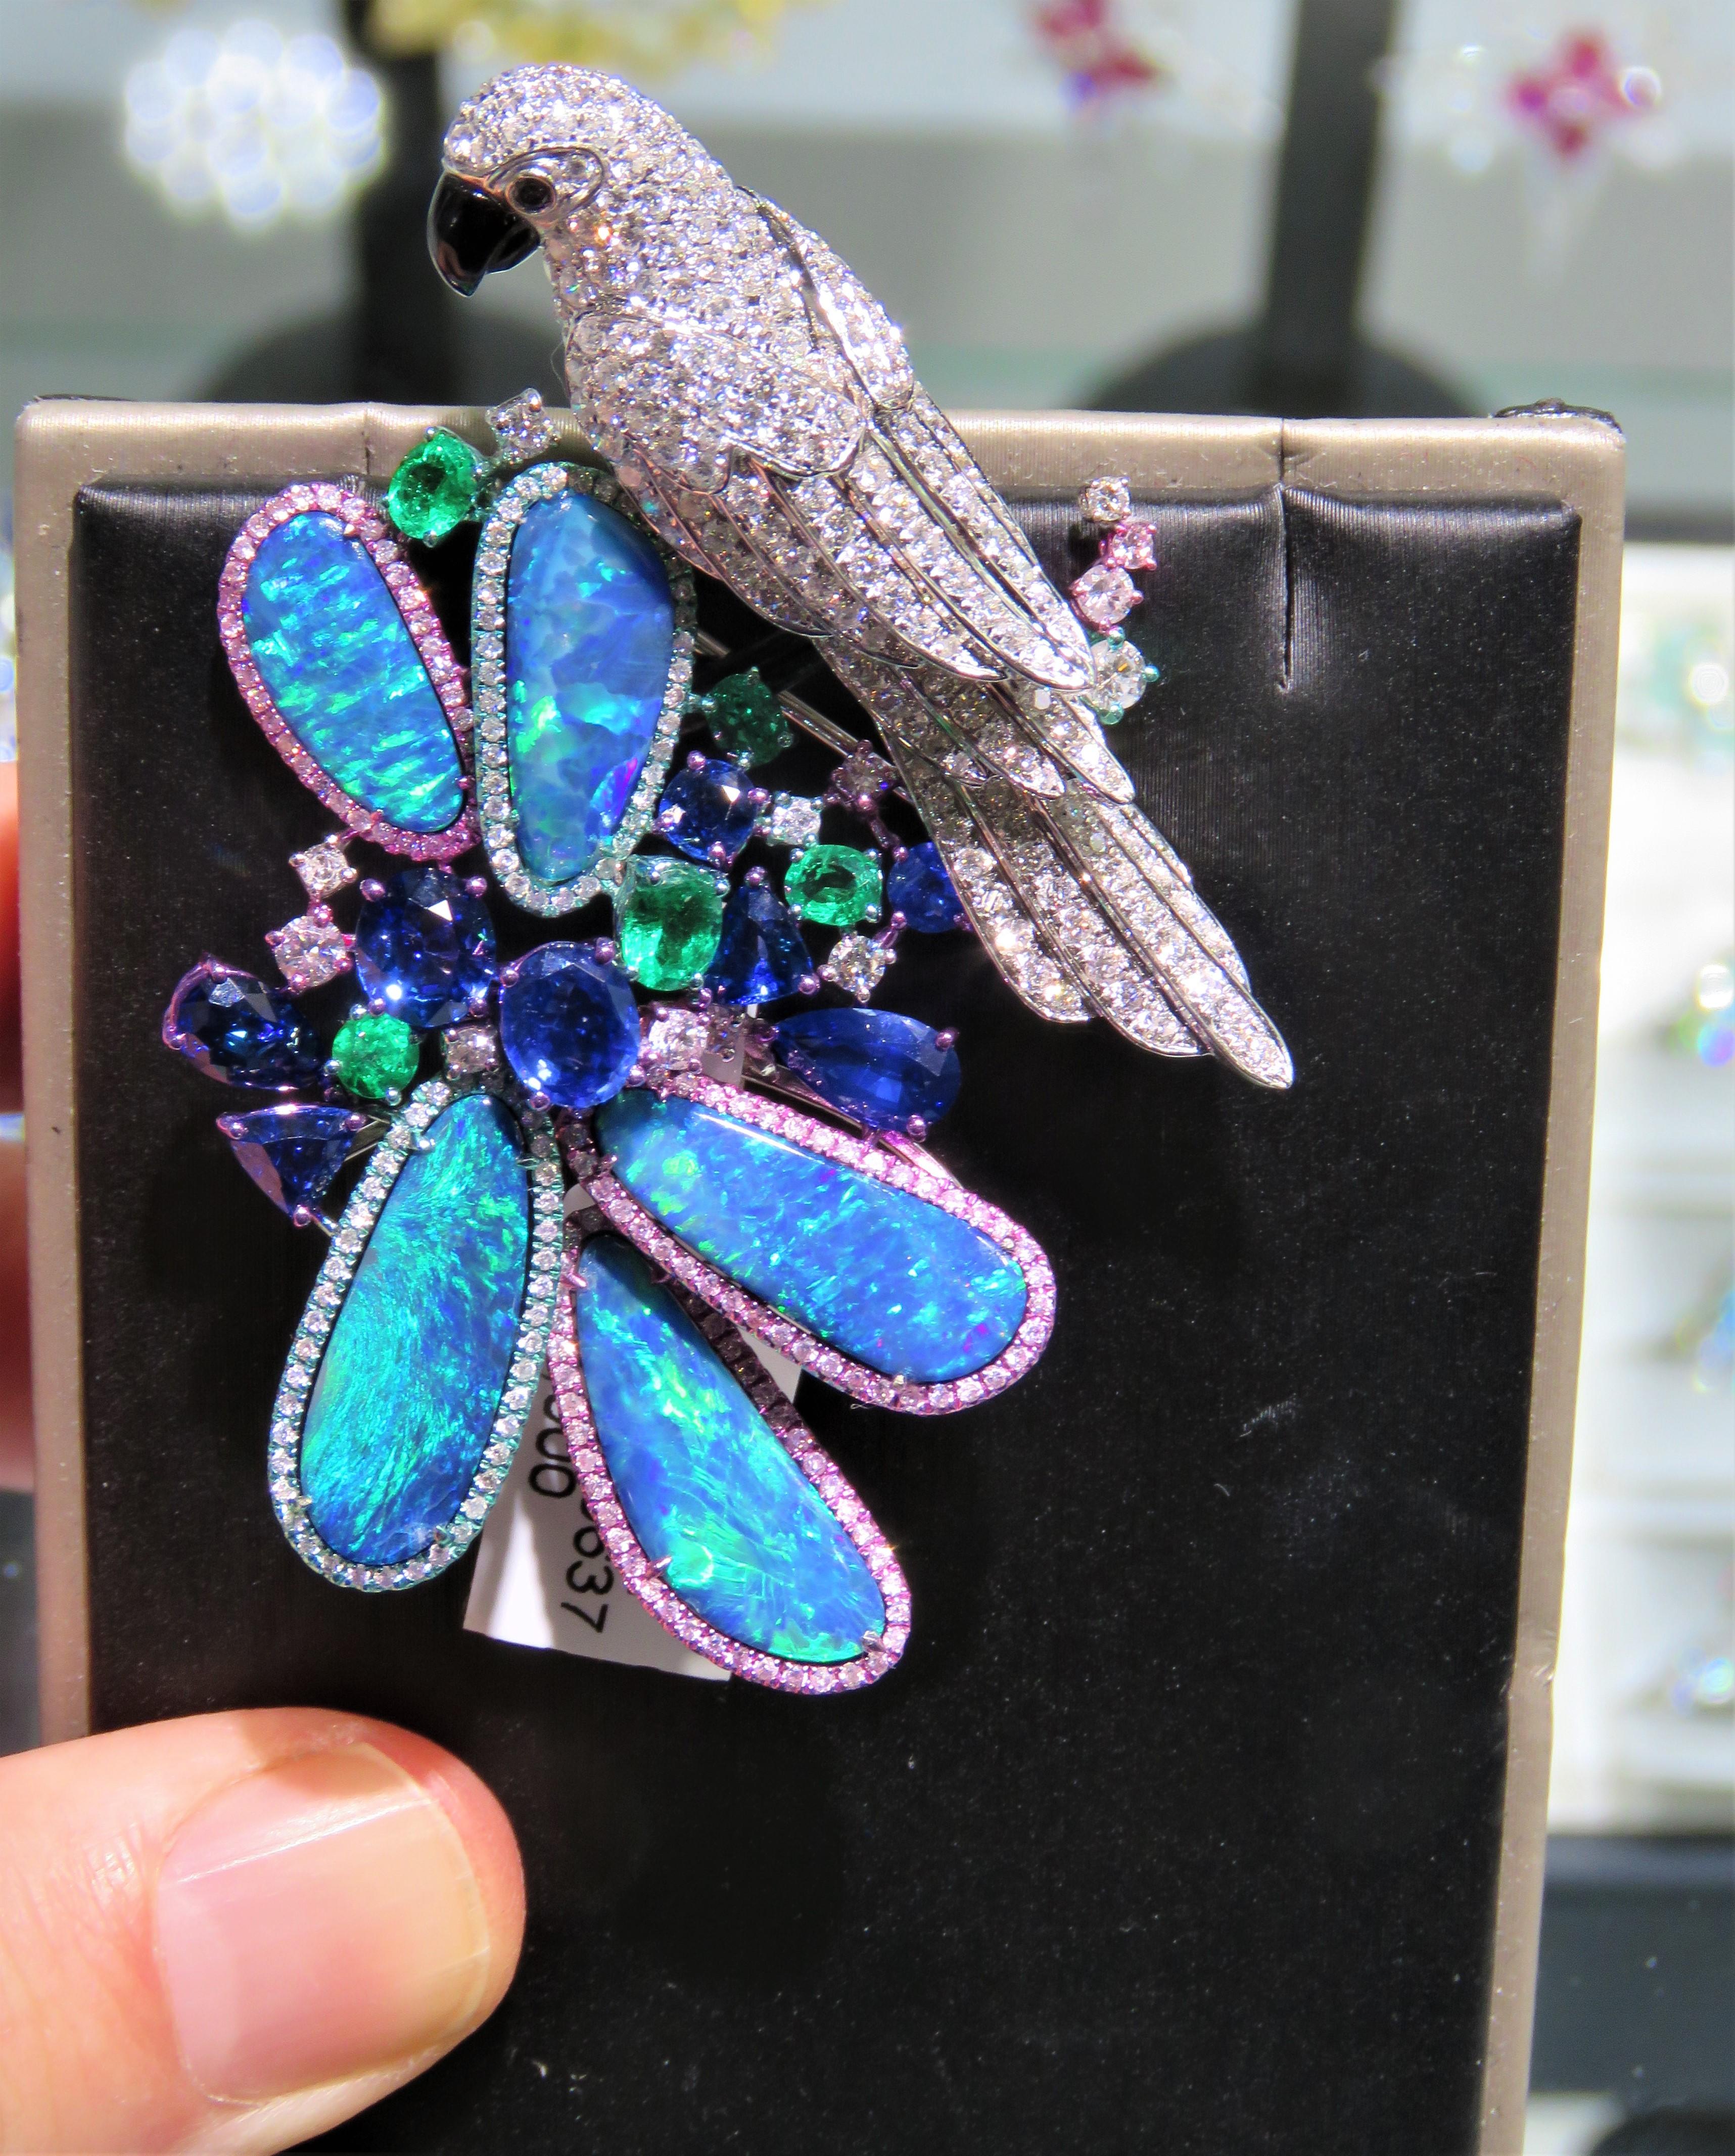 The Following Item we are offering is a Rare Important Radiant 18KT Gold Glistening Australian Black Opal and Diamond Parrot Brooch Pin. Brooch features Magnificent Rare Color Changing Black Opal from Australia with  Exquisite Round Diamonds and